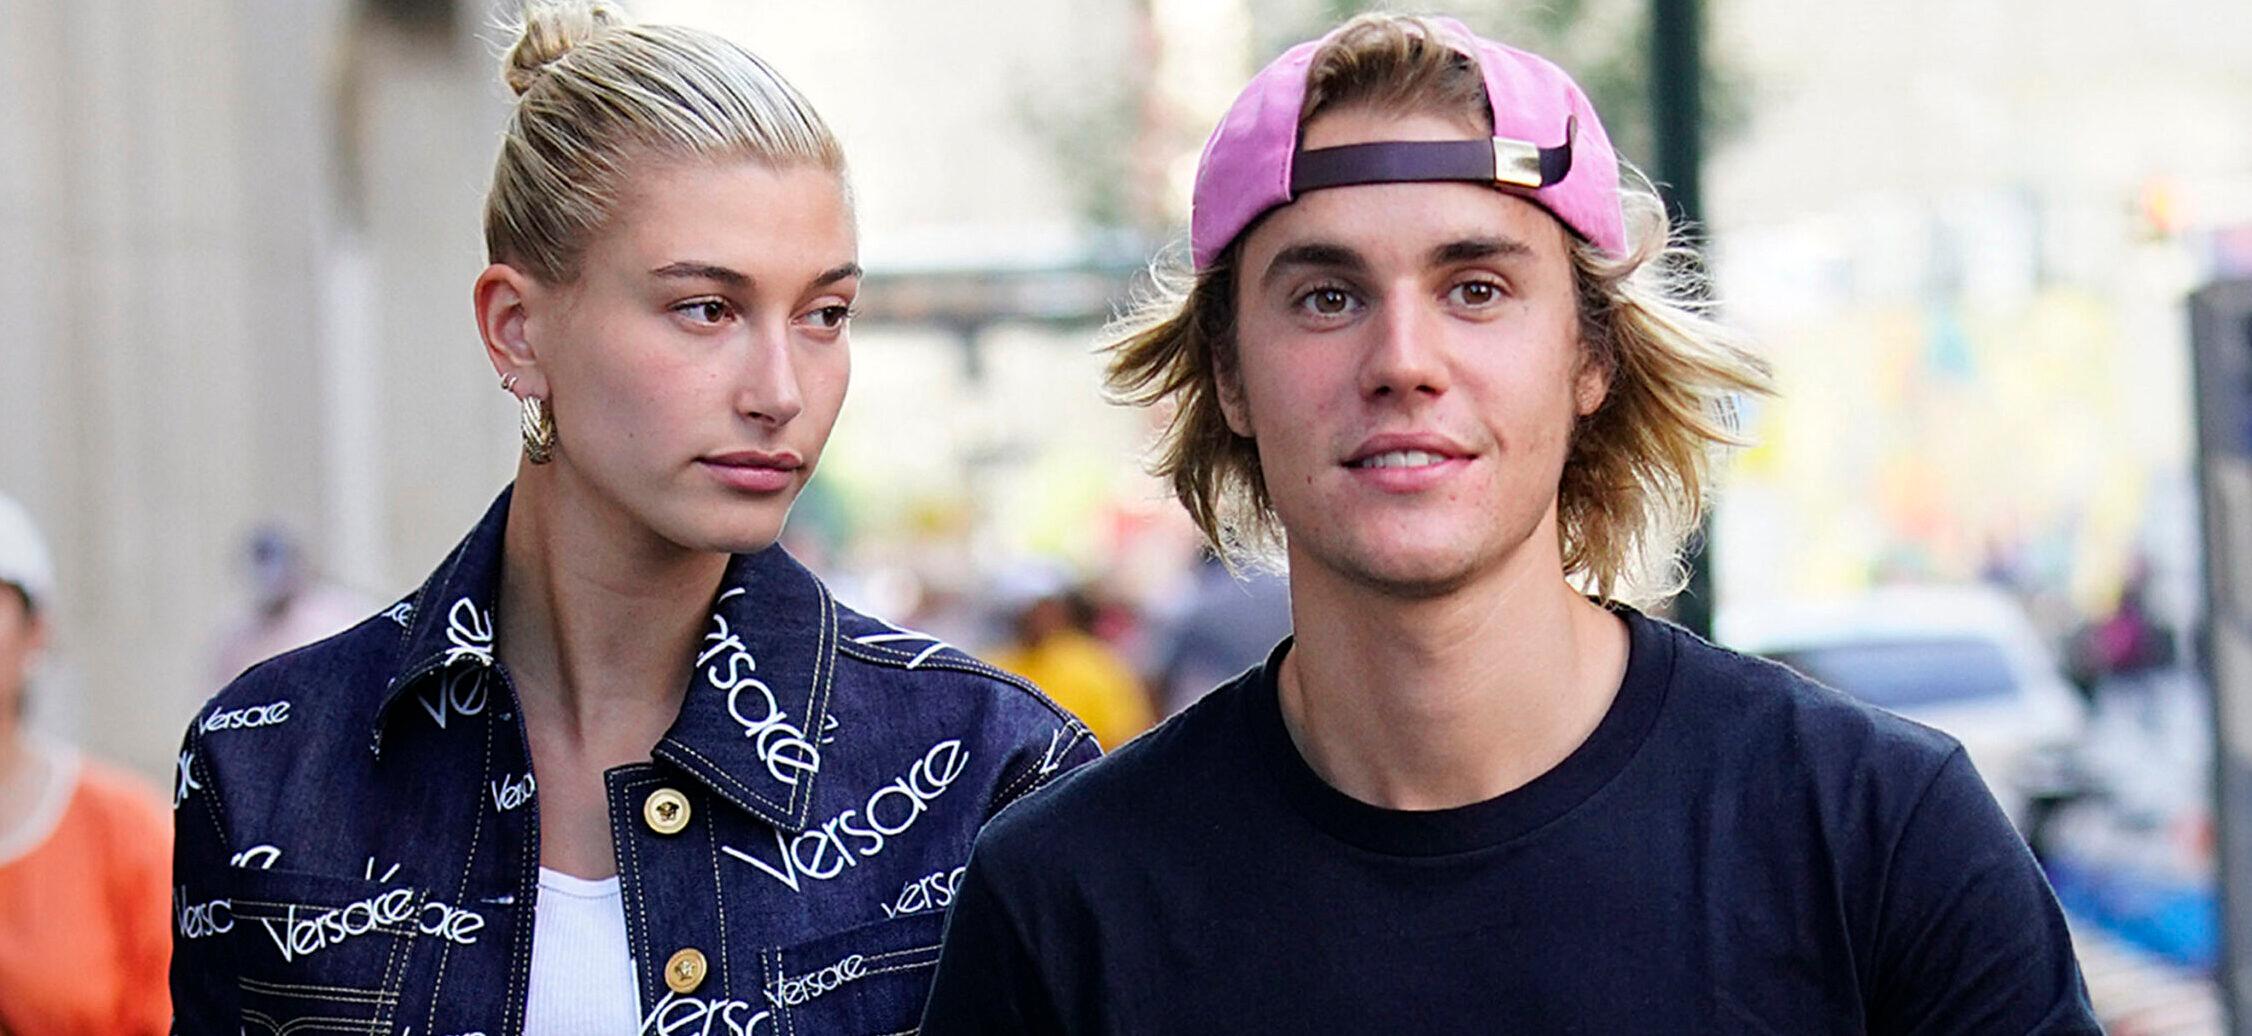 Hailey Bieber Addresses ‘False’ Rumors About Marriage To Justin Bieber After Dad Asked For ‘Prayers’